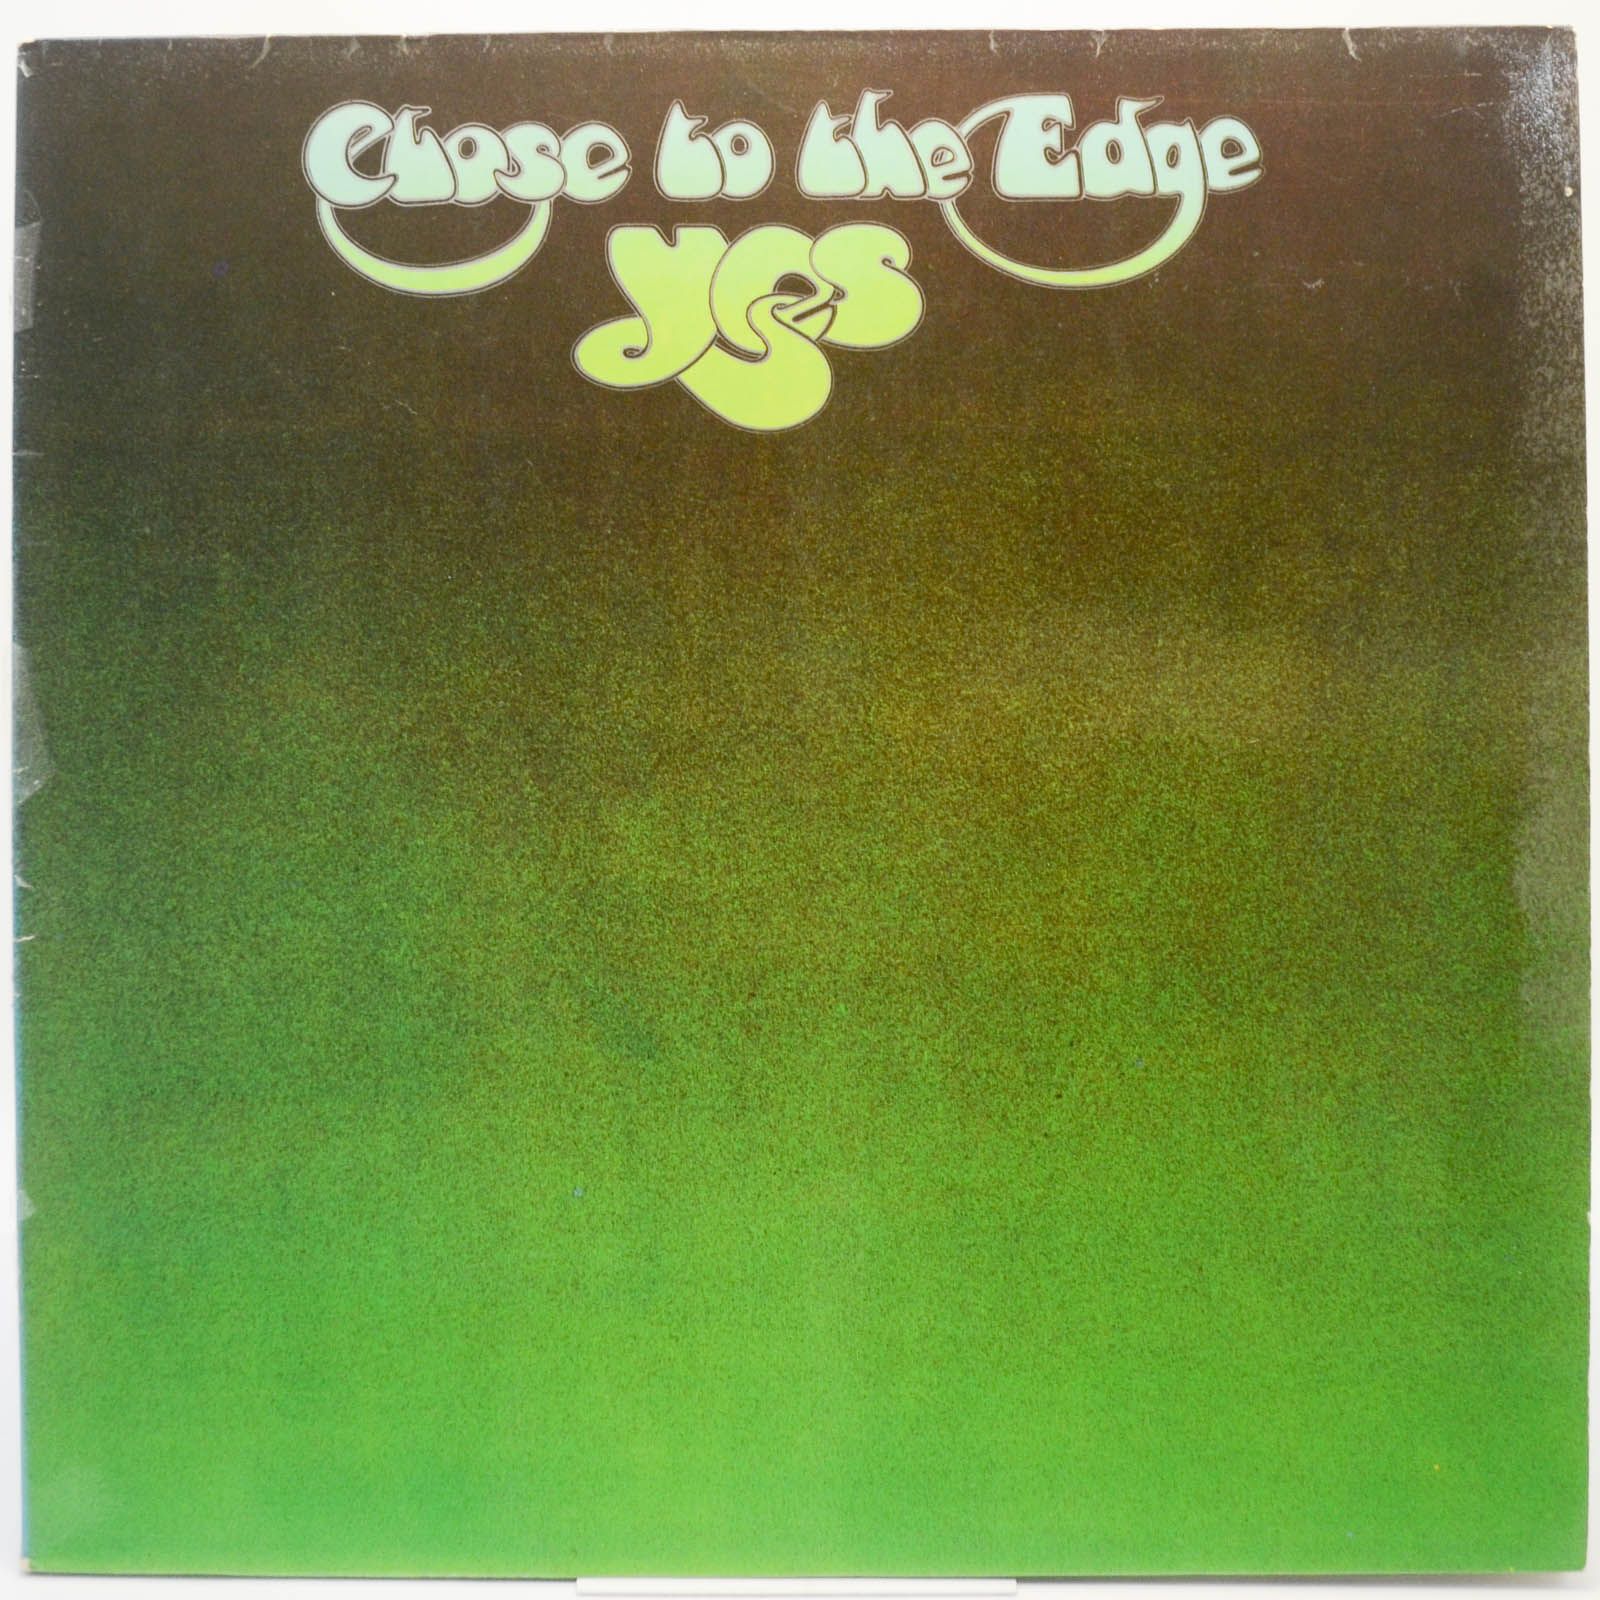 Yes — Close To The Edge, 1972